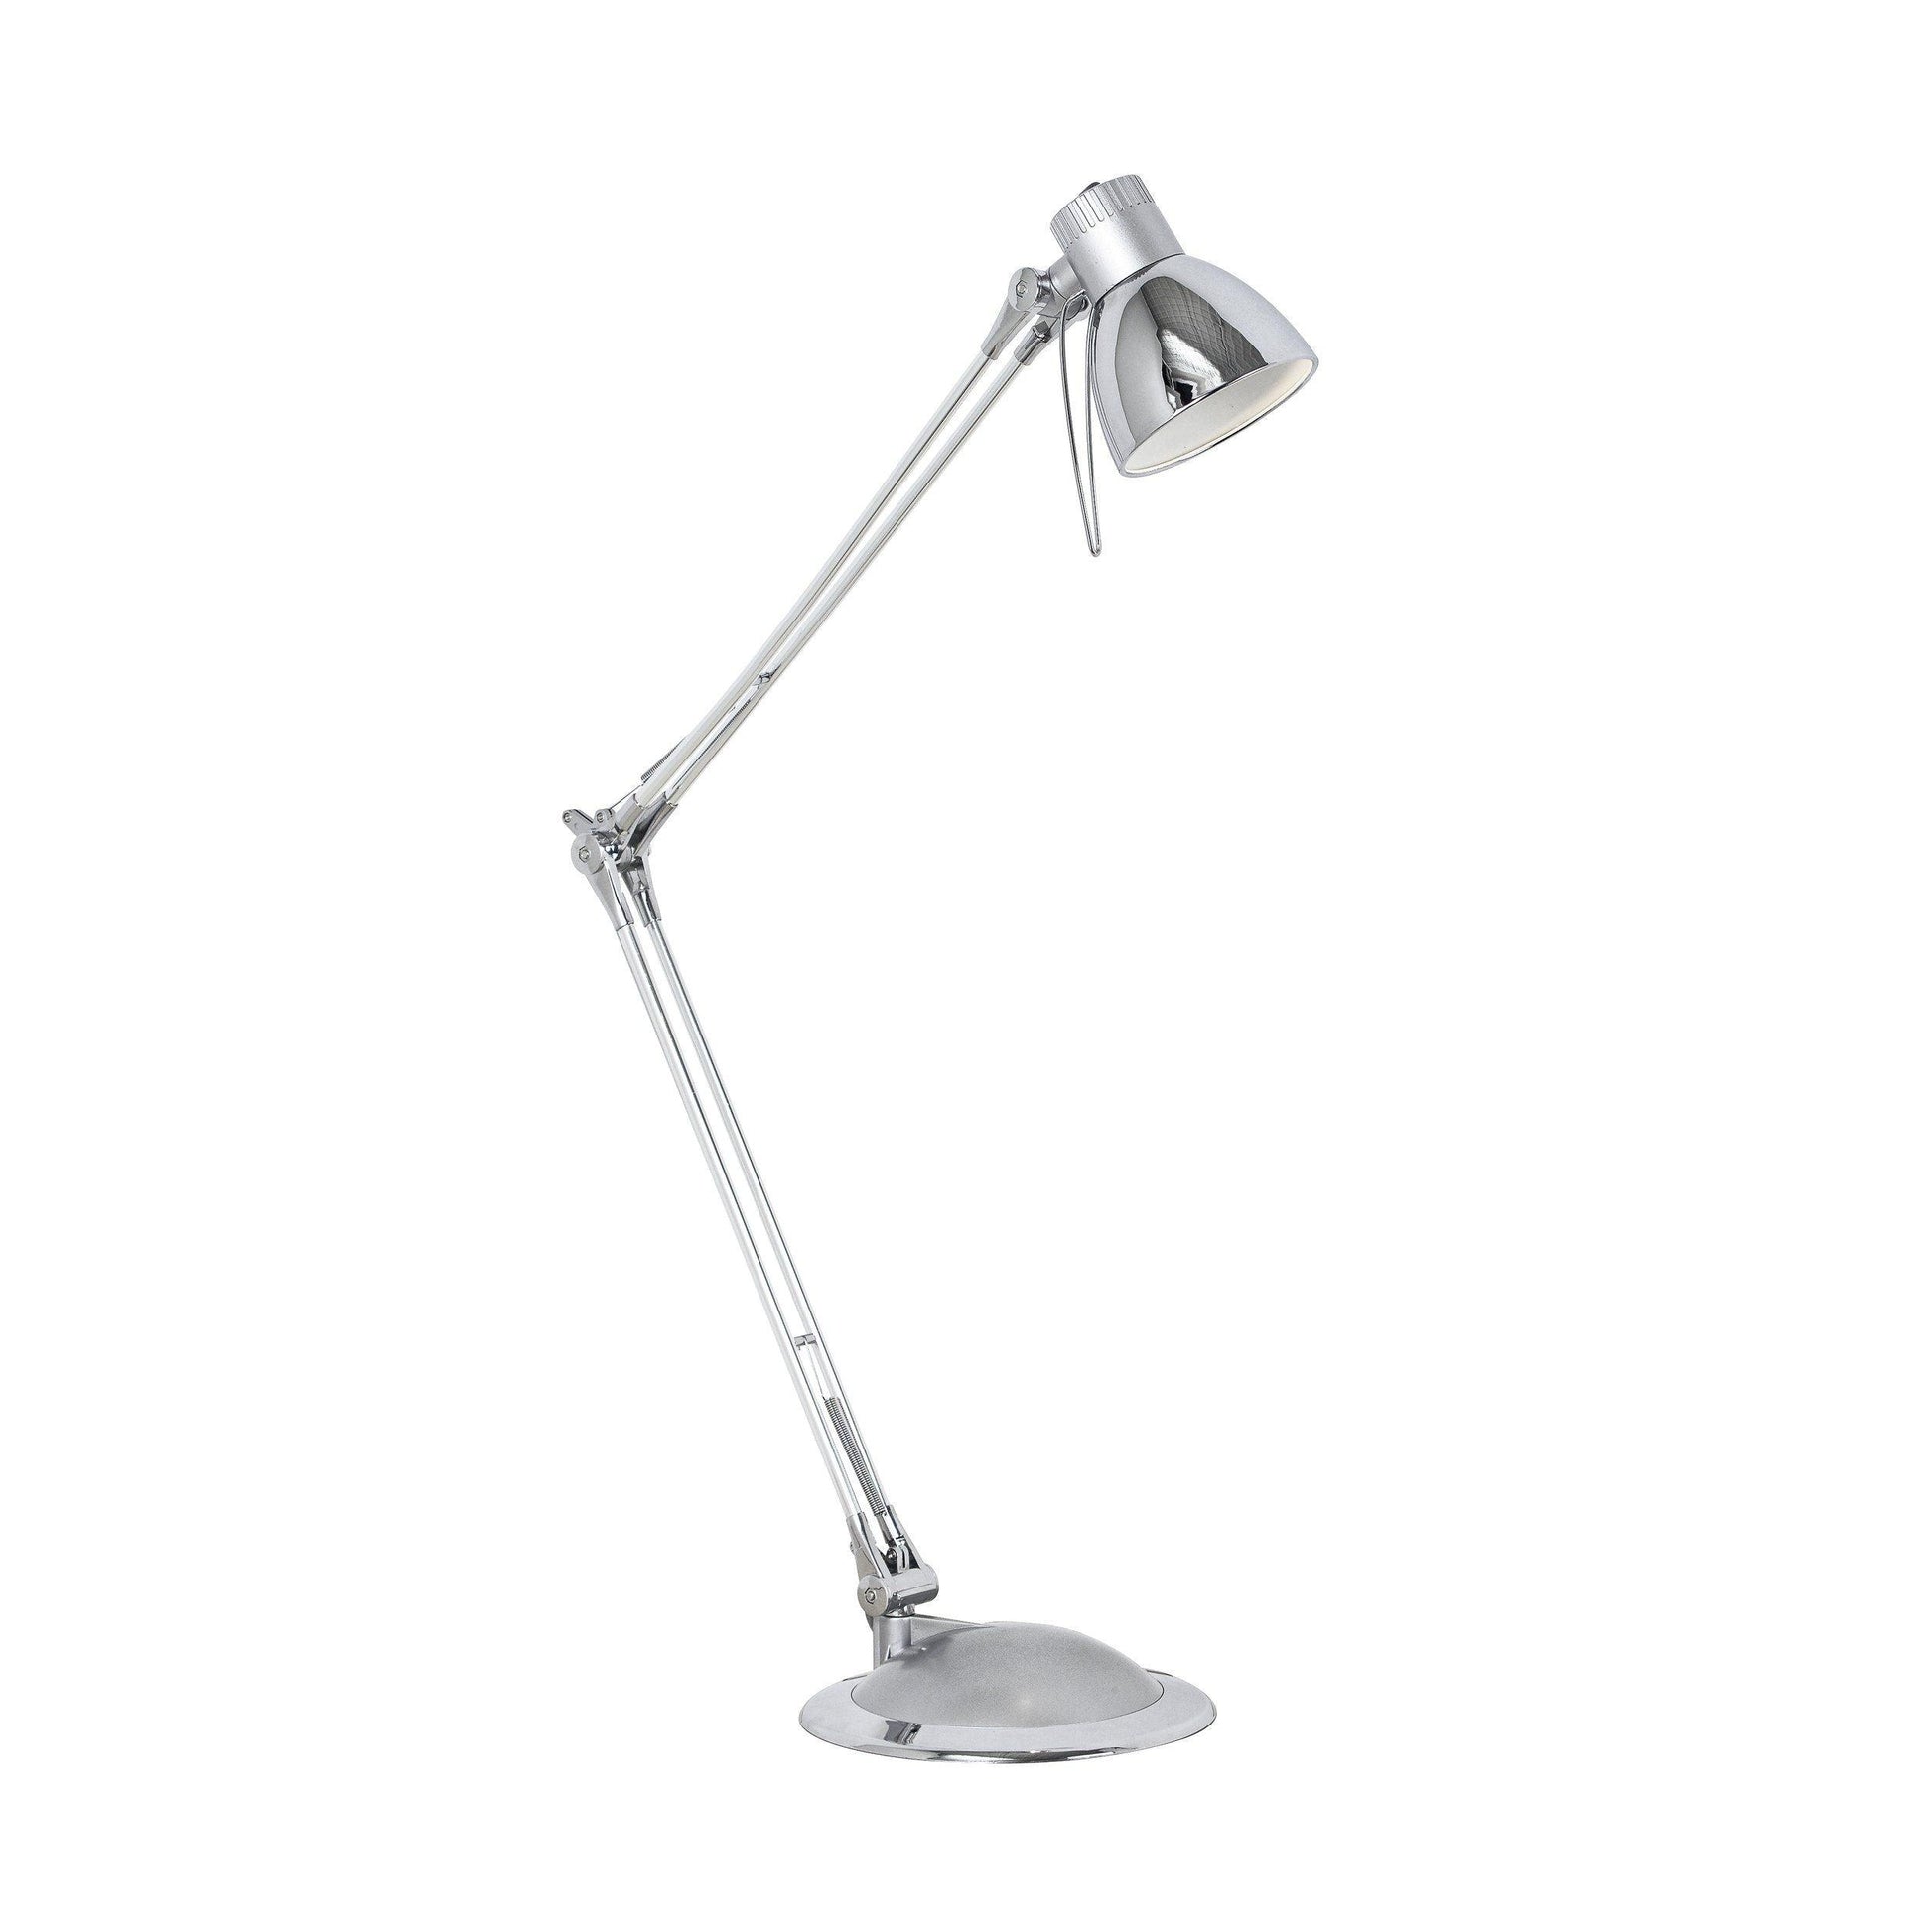 PLANO LED Table Lamp by The Light Library